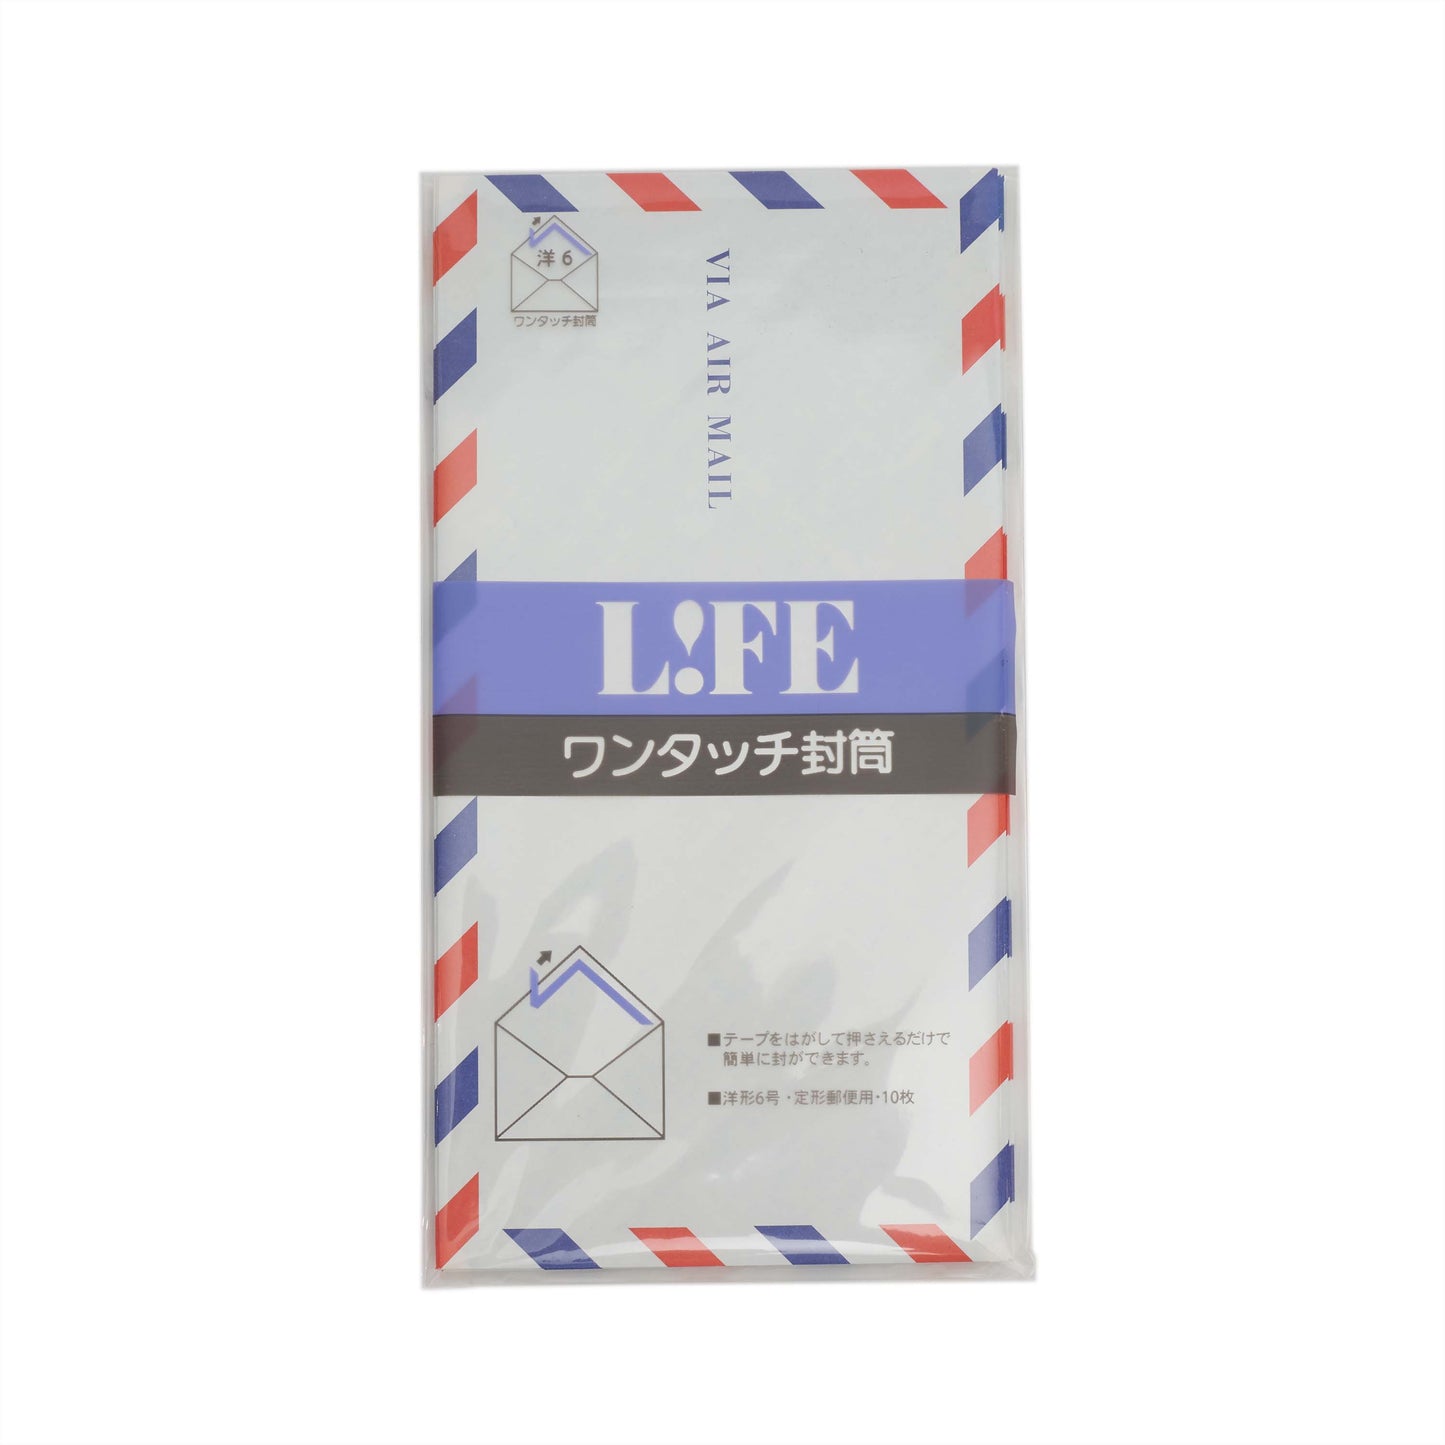 Life Airmail envelopes "via air mail" E26. Red white and blue envelopes package